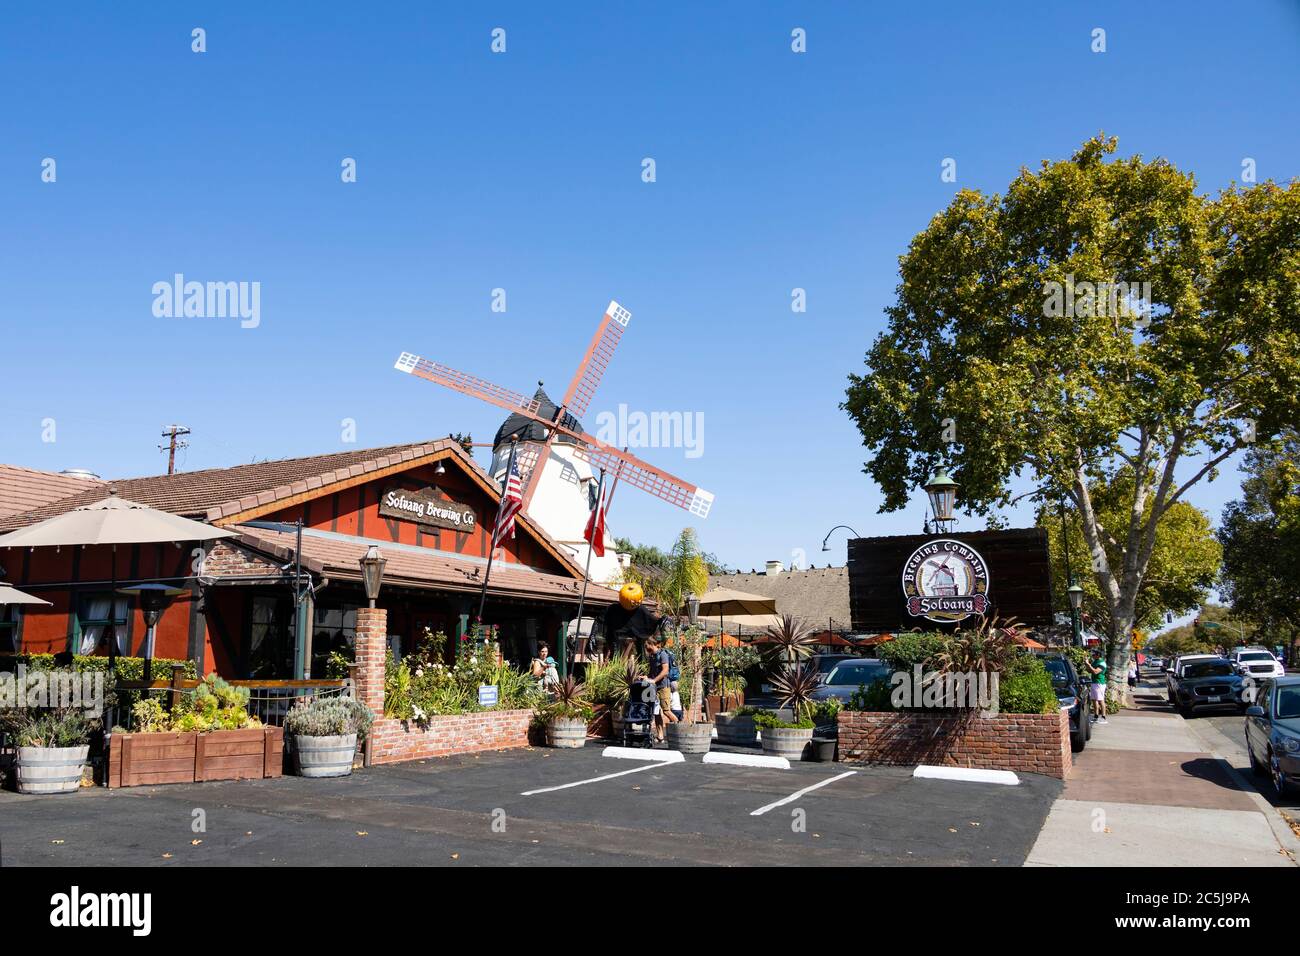 The Solvang Brewing company, The Danish community of Solvang, Ynez Valley, California, United States of America Stock Photo